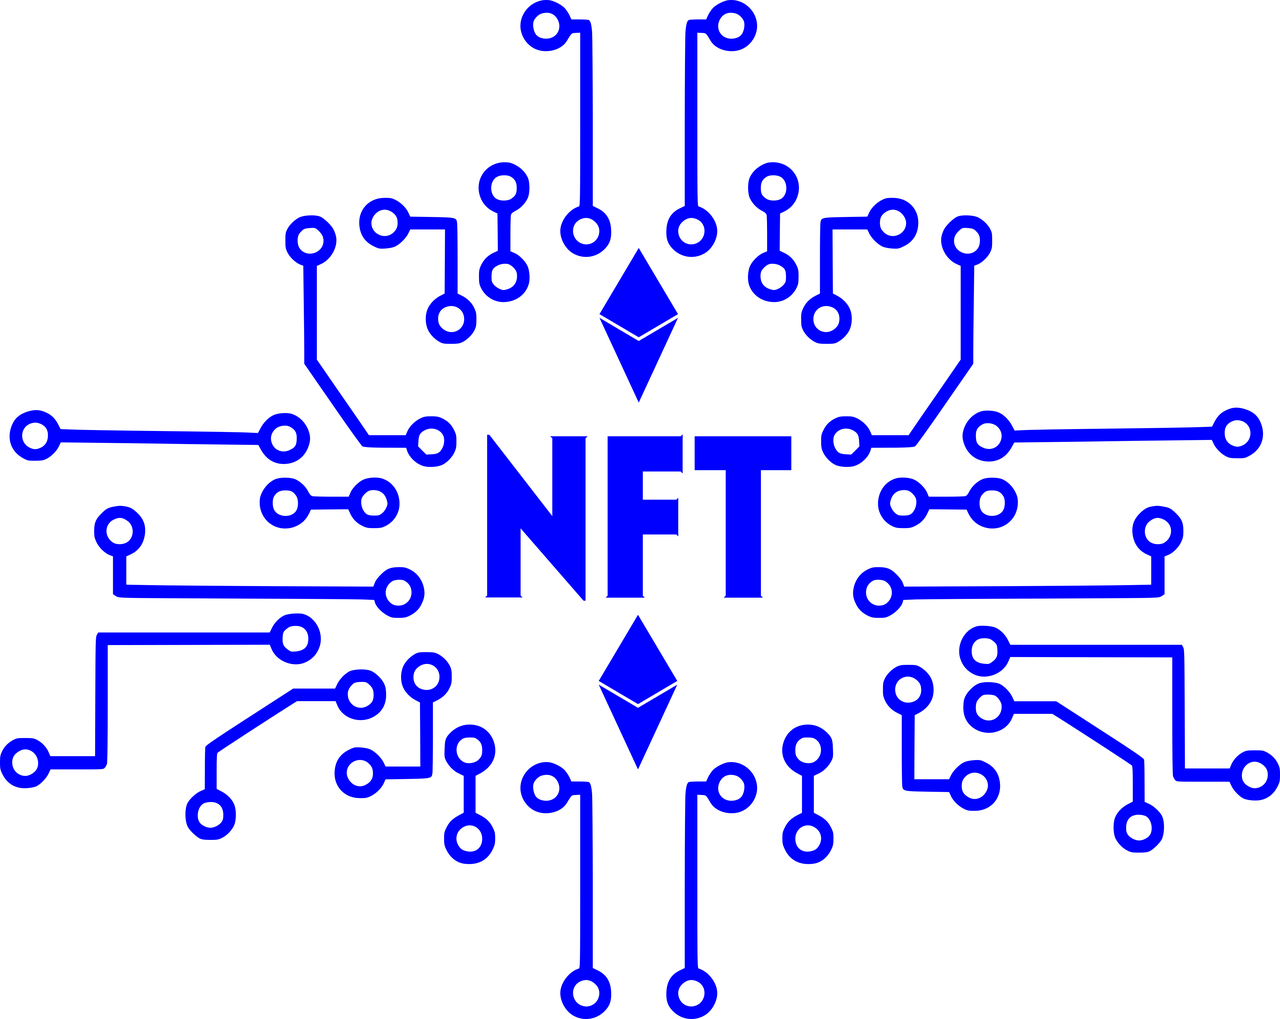 Demystifying NFT Crypto: A Beginner’s Guide to the Next Digital Revolution